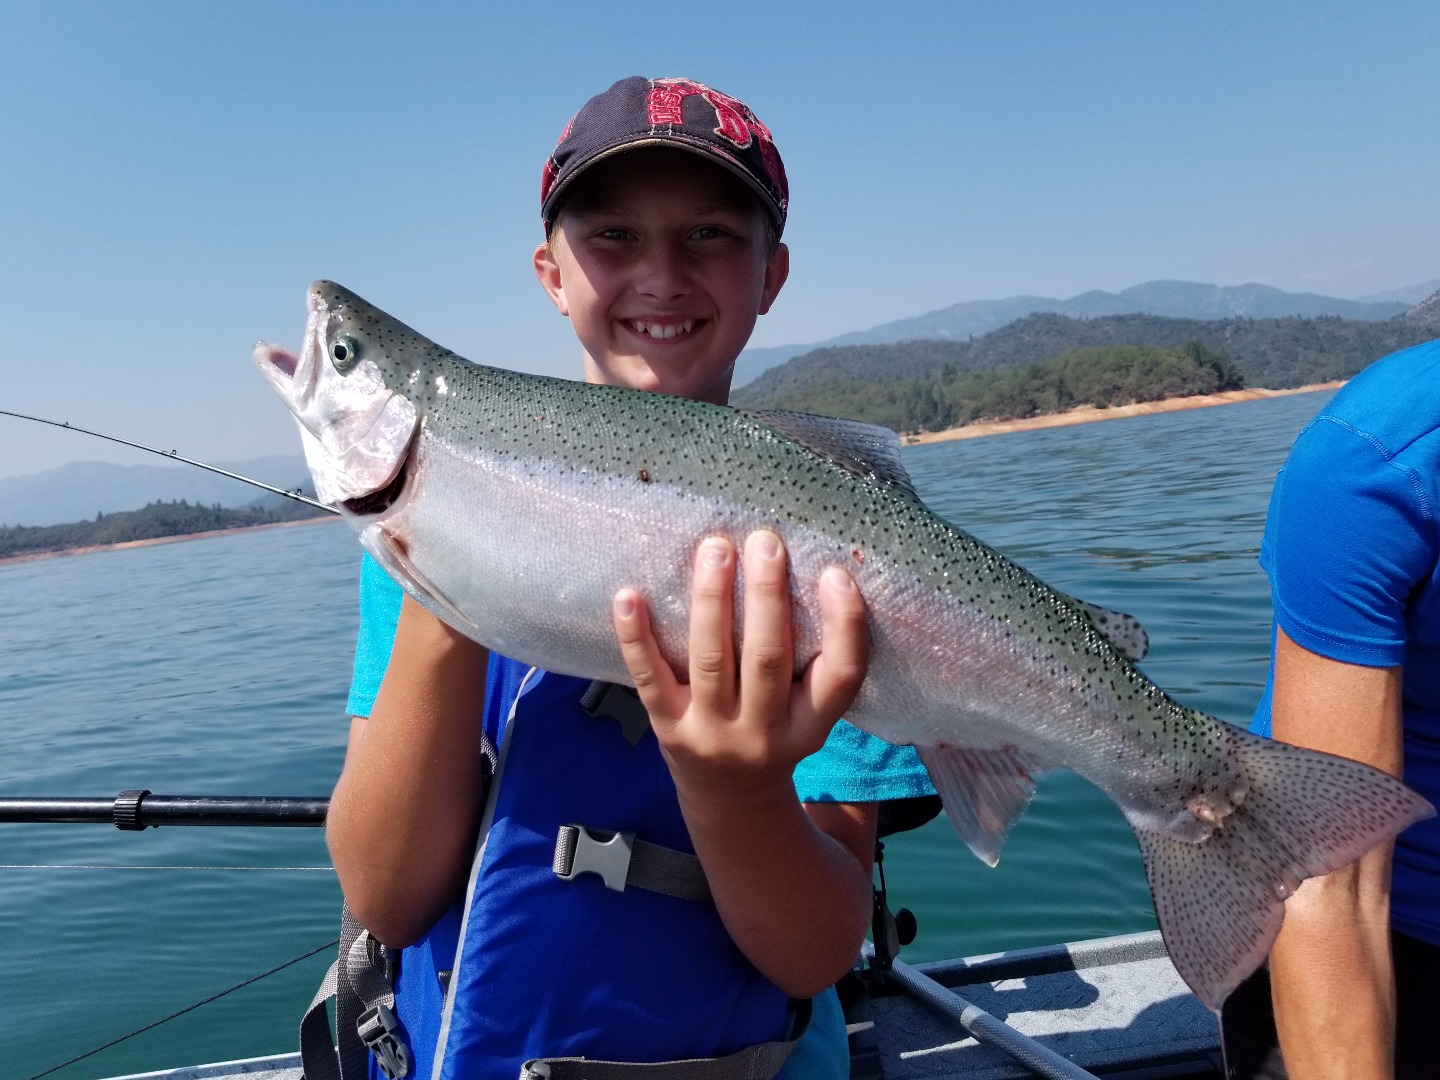 Big Trout on the bite at Shasta Lake